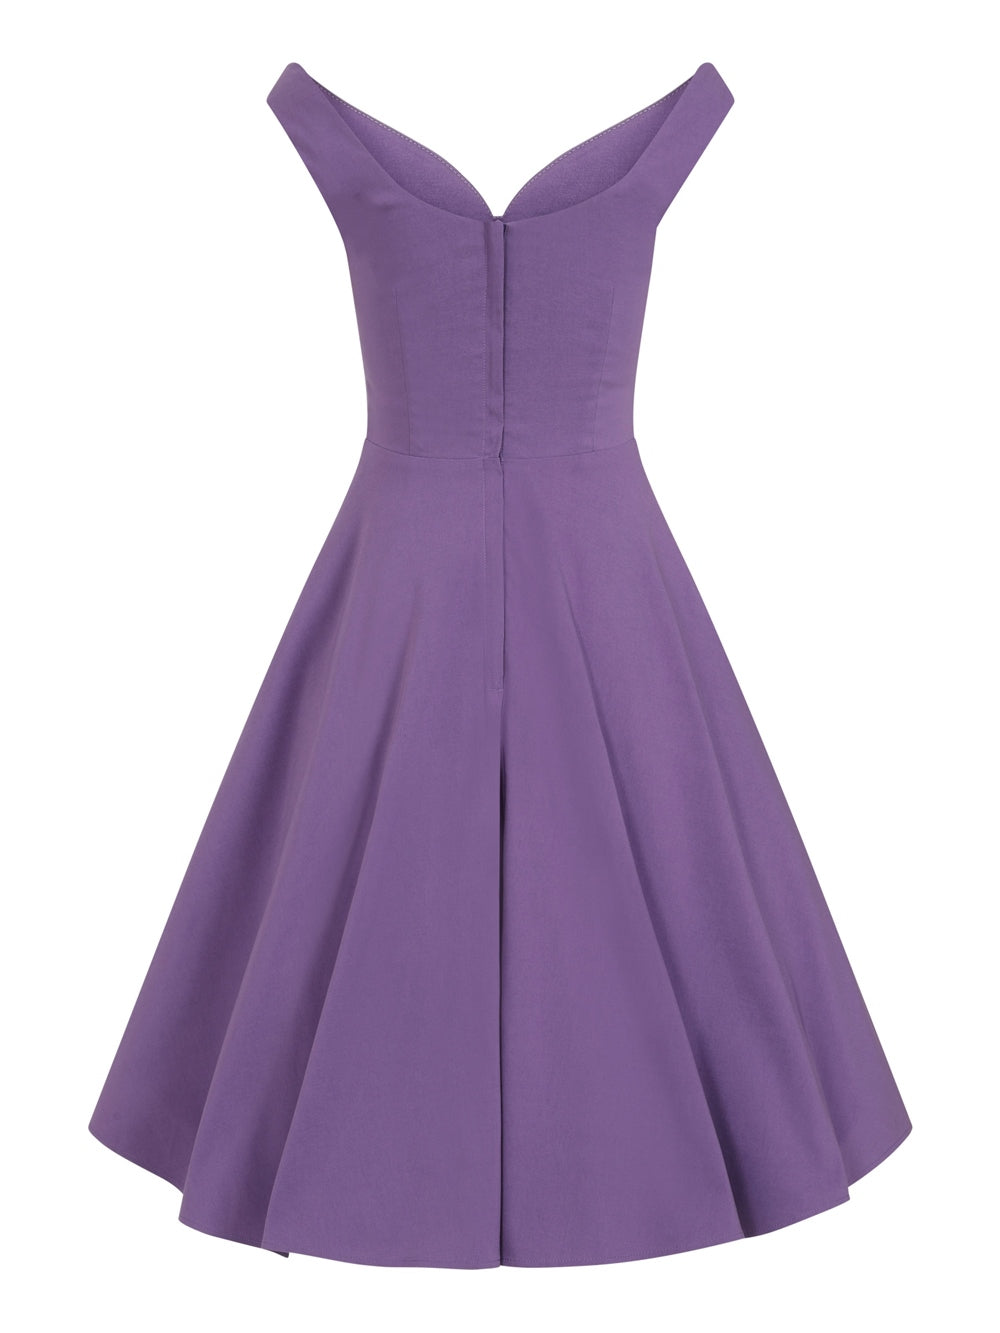 Ridly Plain Swing Dress in Purple by Collectif